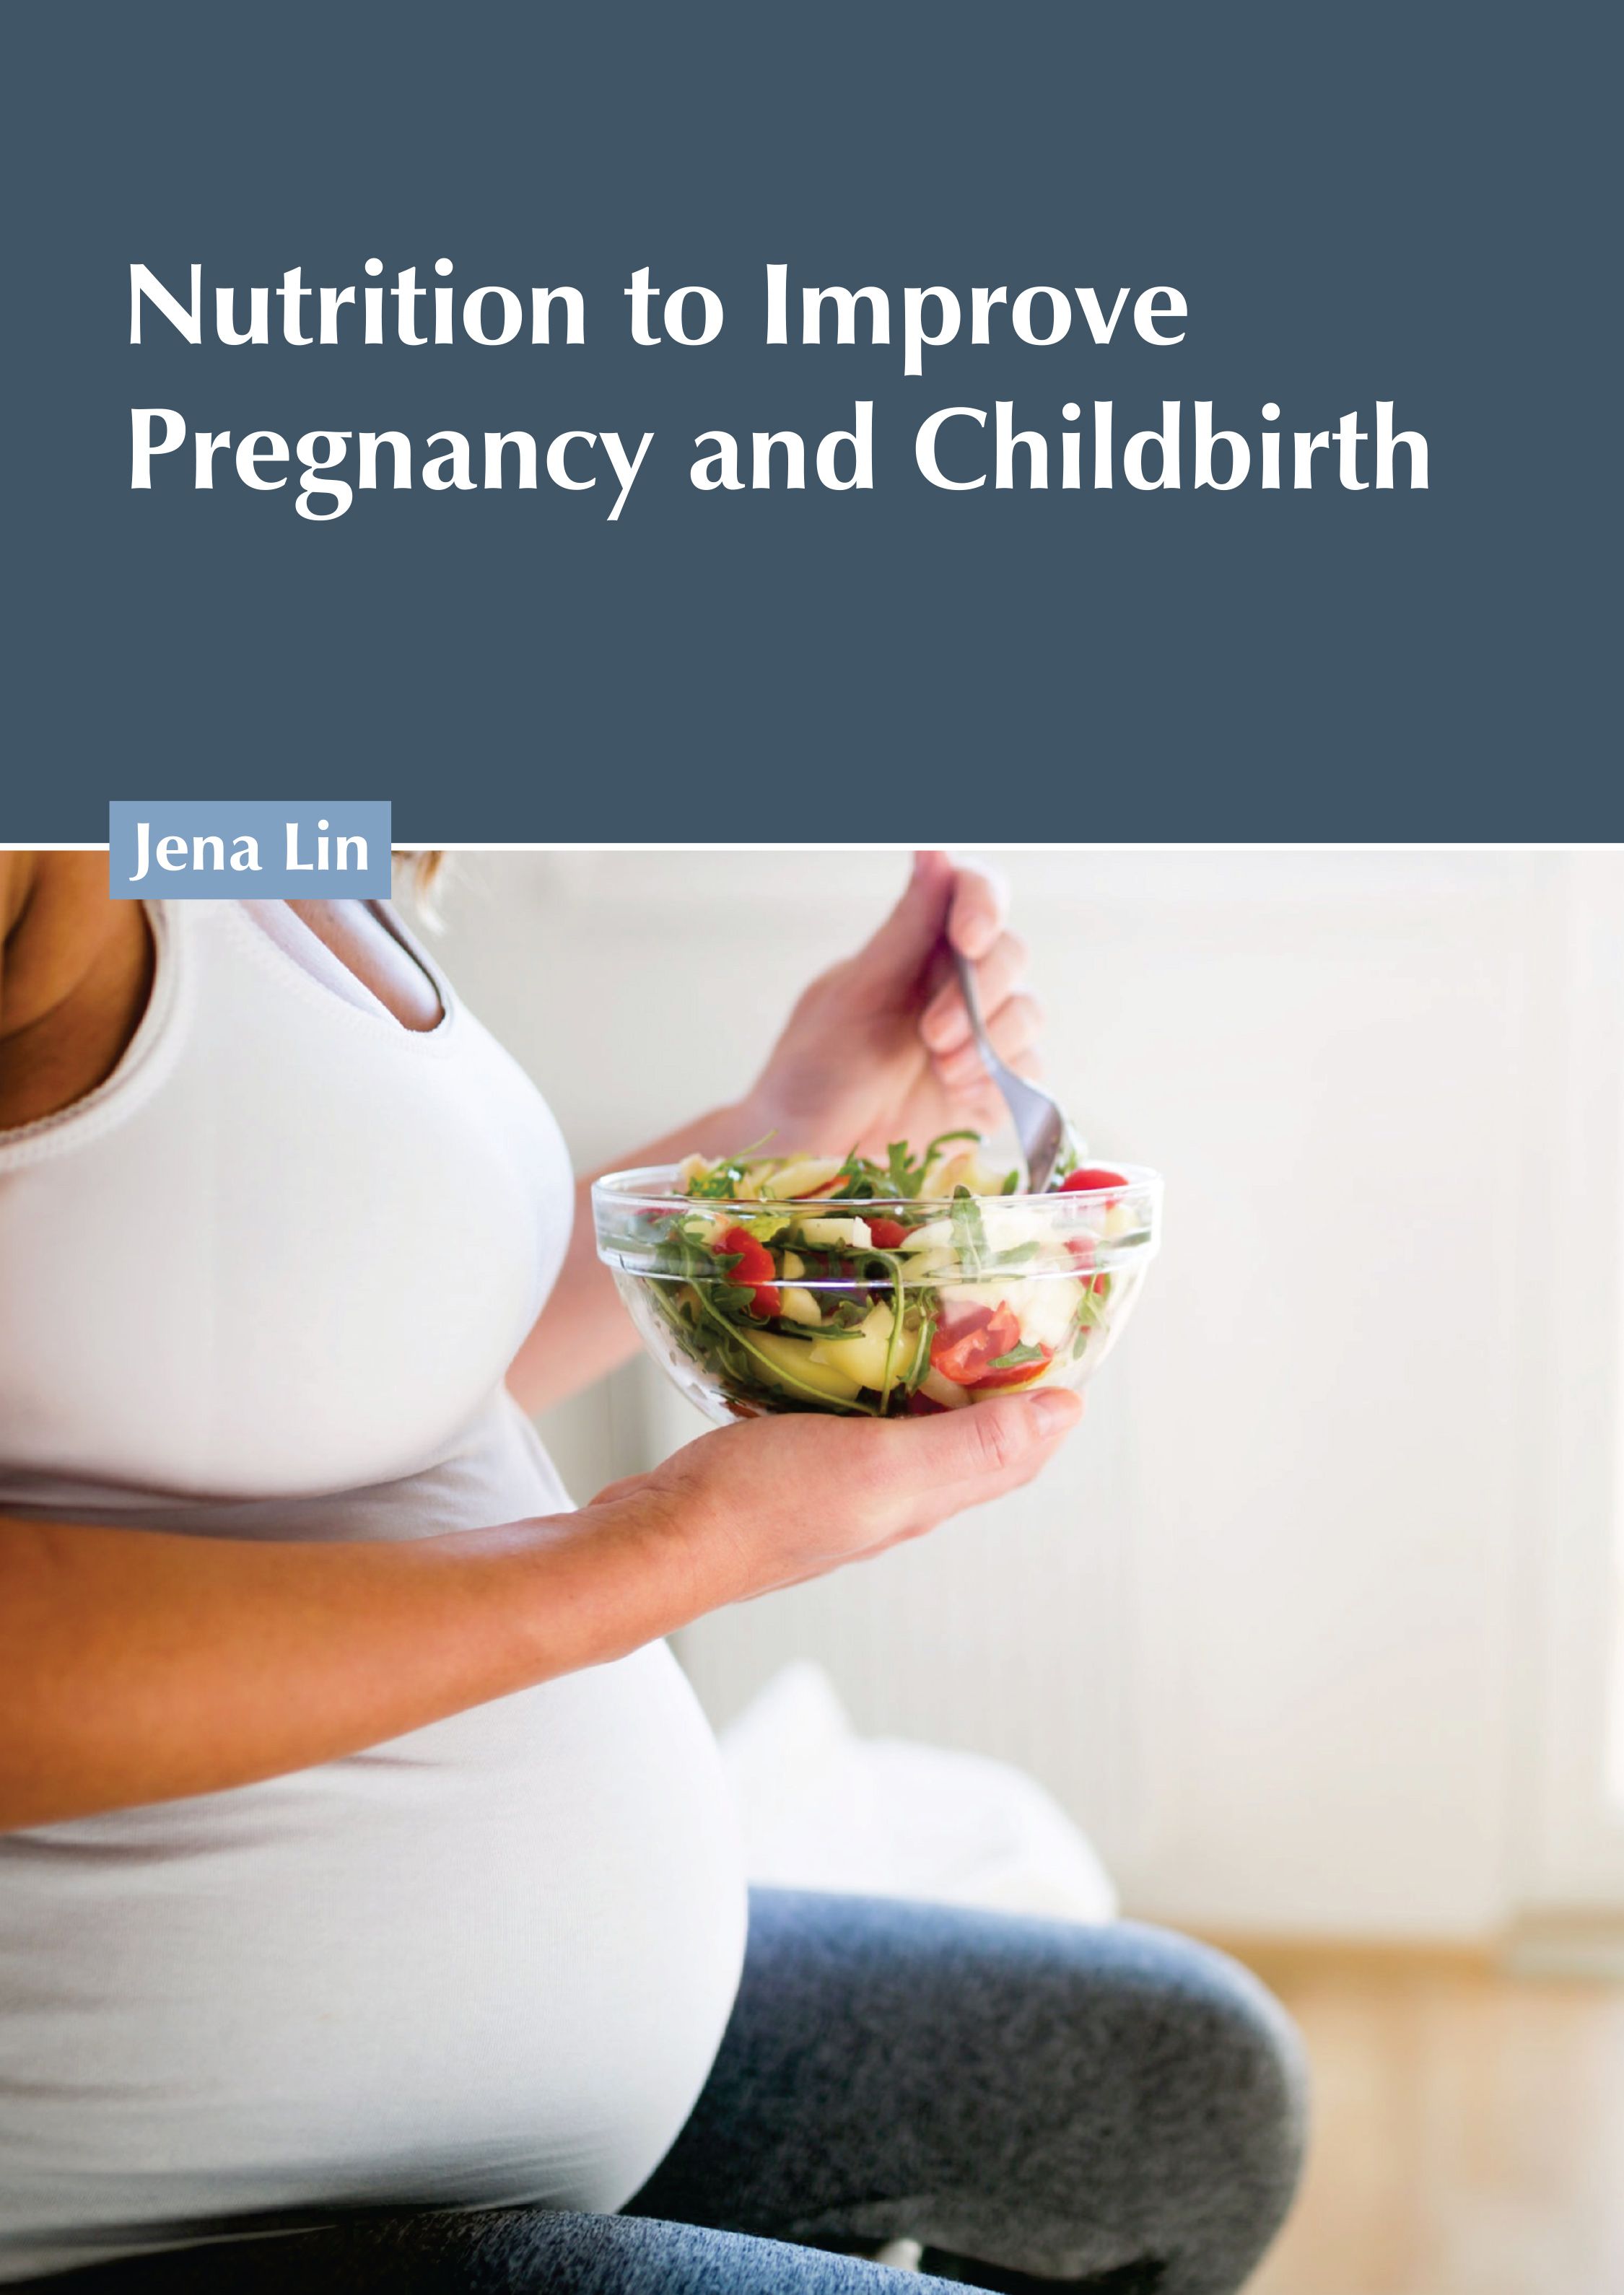 

exclusive-publishers/american-medical-publishers/nutrition-to-improve-pregnancy-and-childbirth-9781639277636